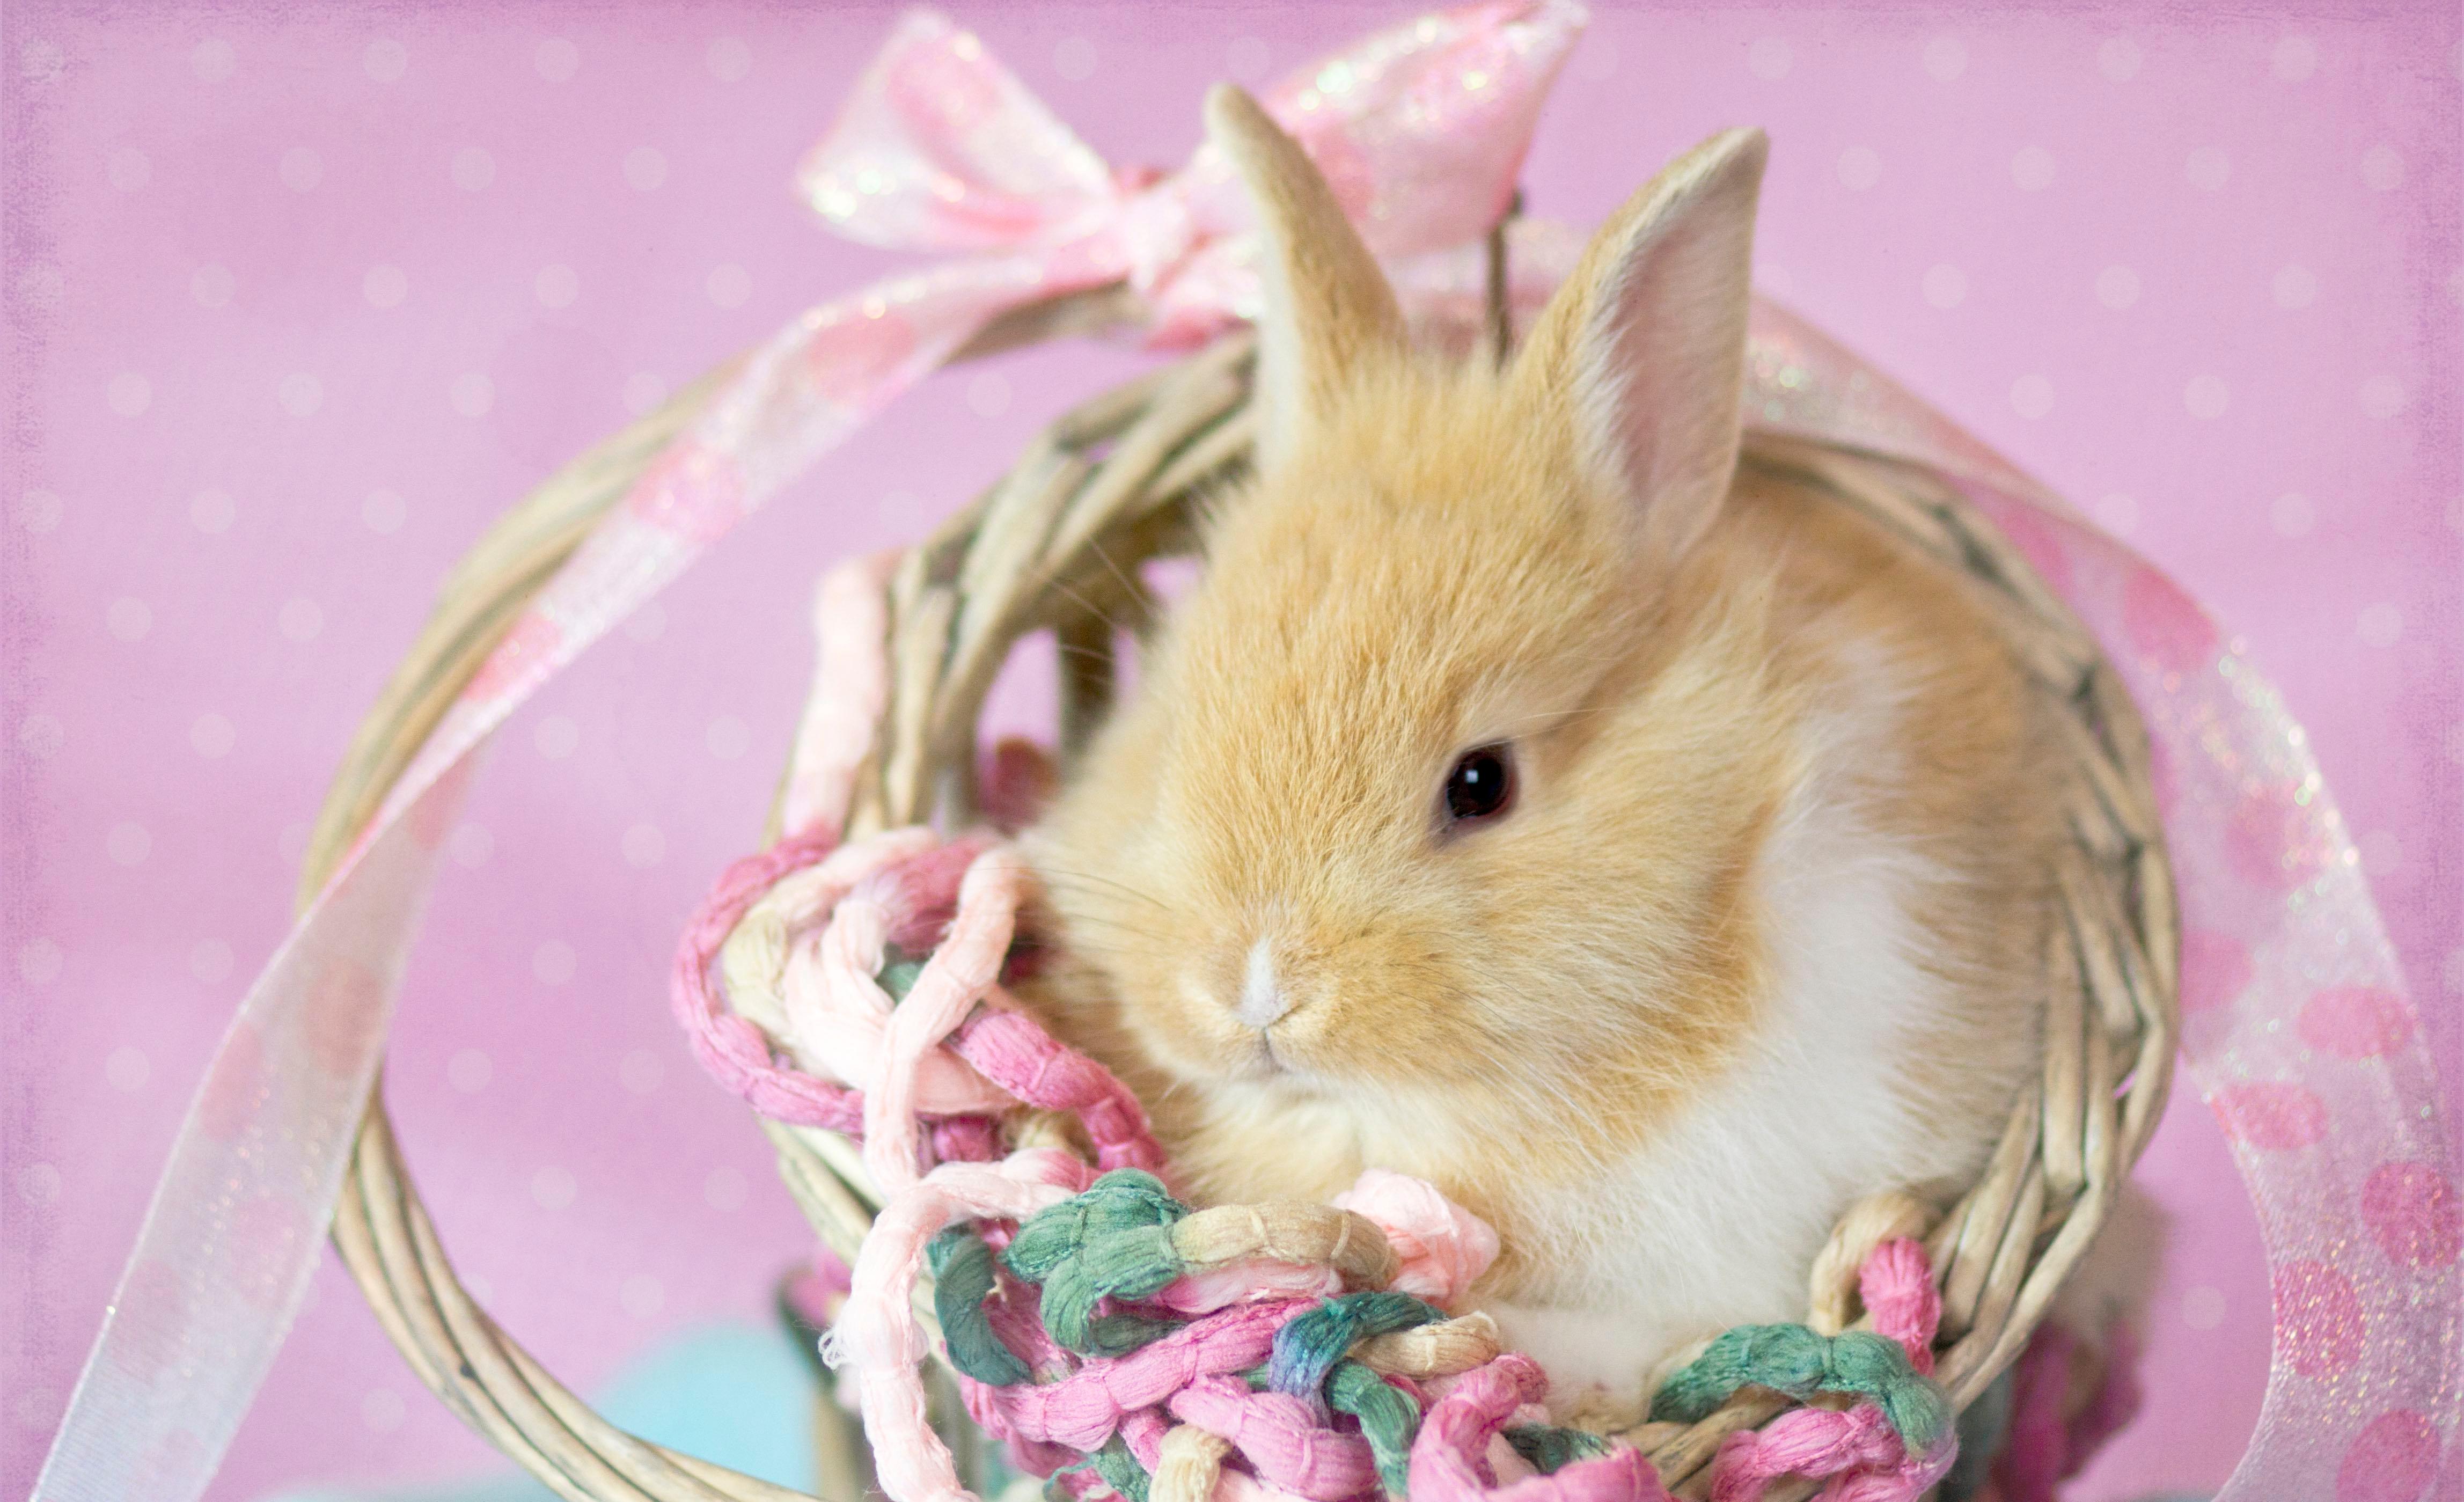 A bunny in an Easter basket.